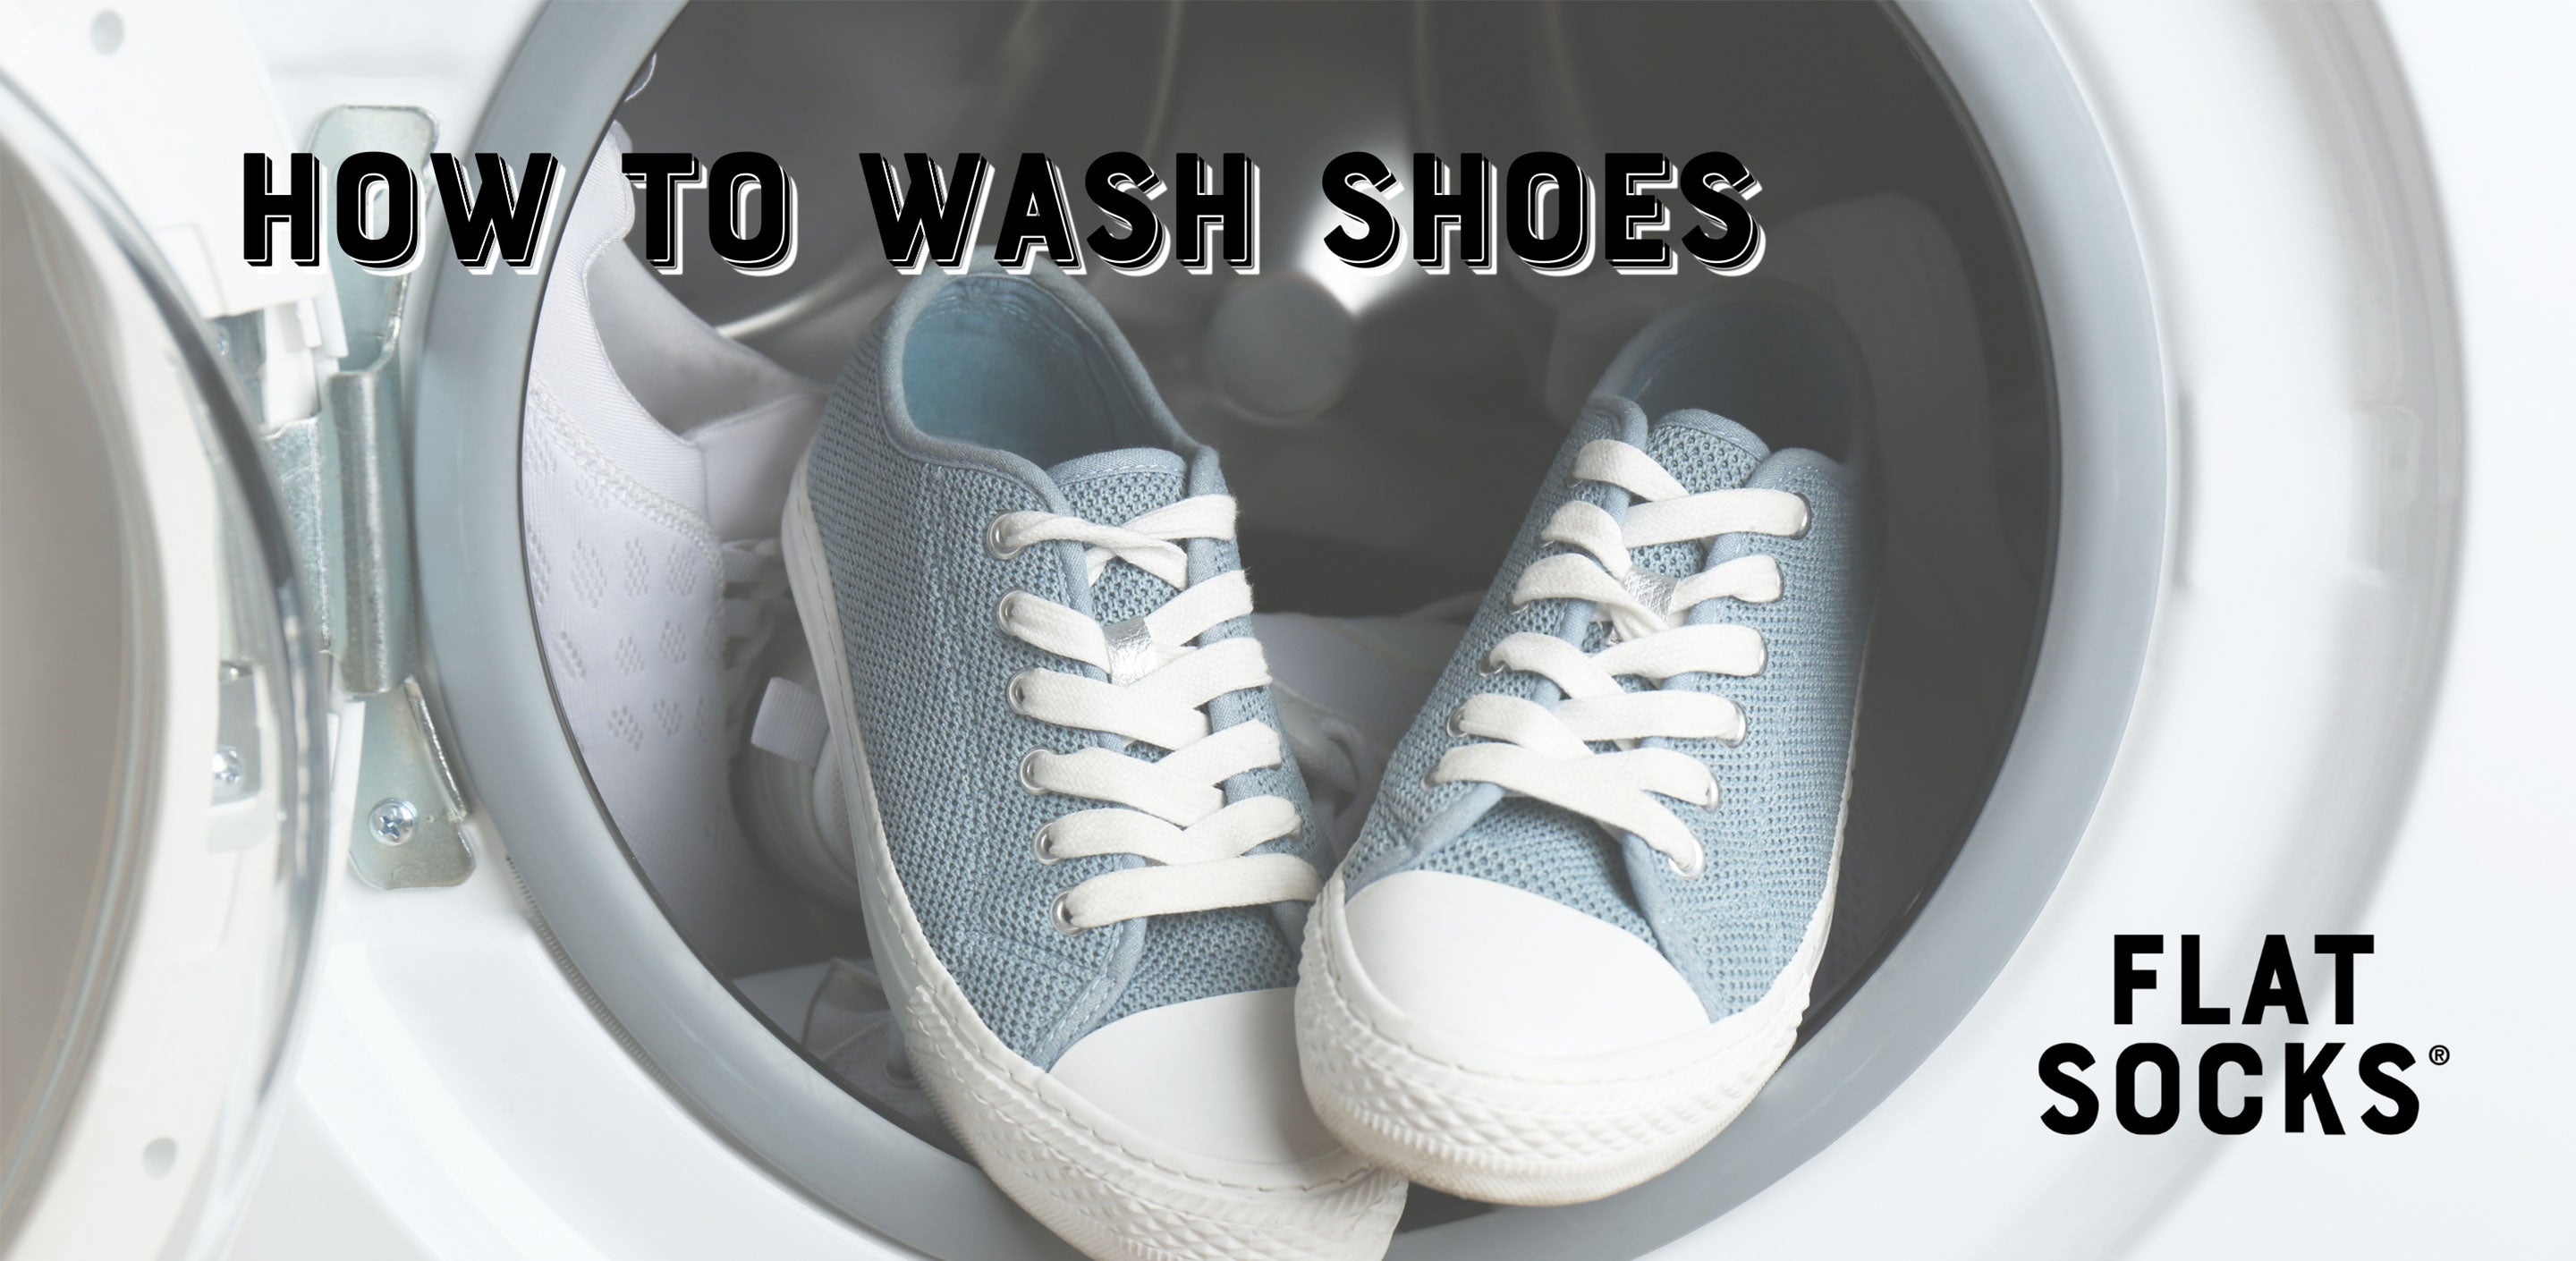 How to Wash Shoes in a Washing Machine by FLAT SOCKS